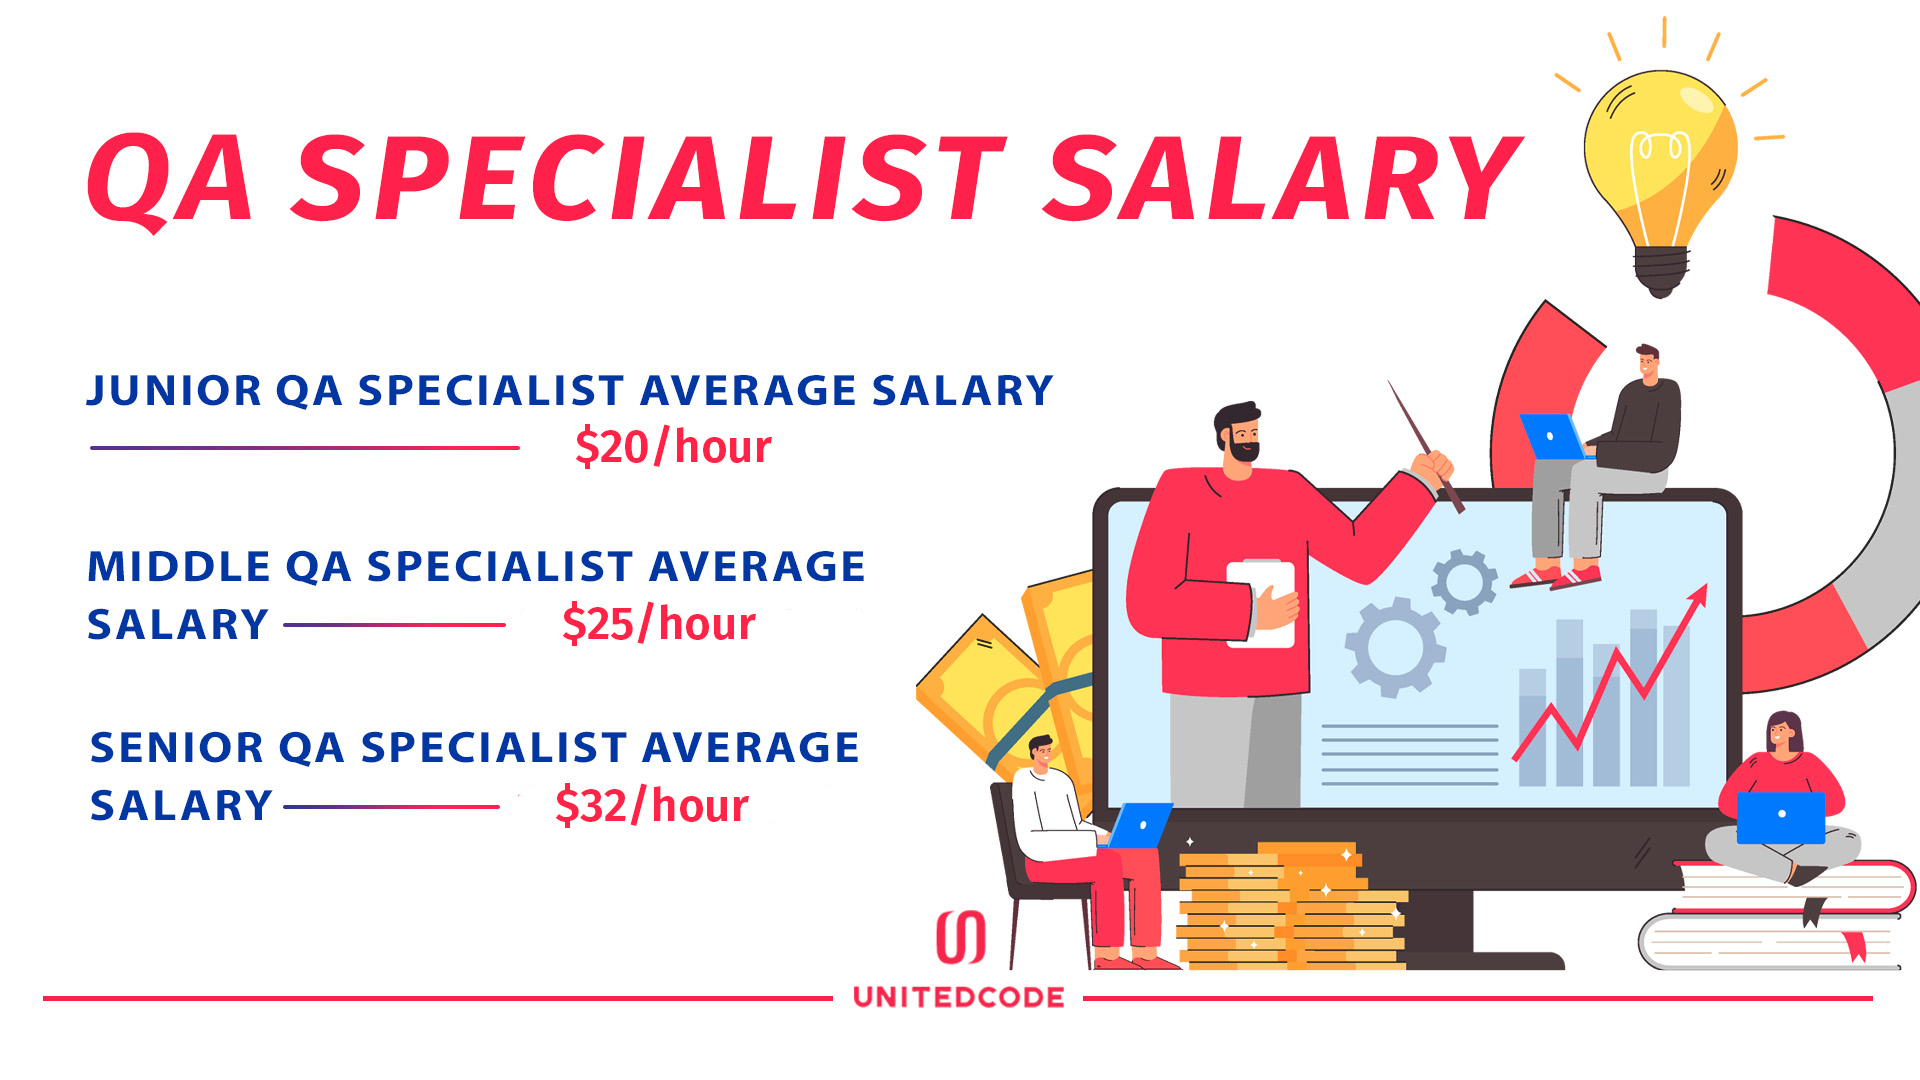 Manual vs Automation Testing - Salary Differences for QA Specialists